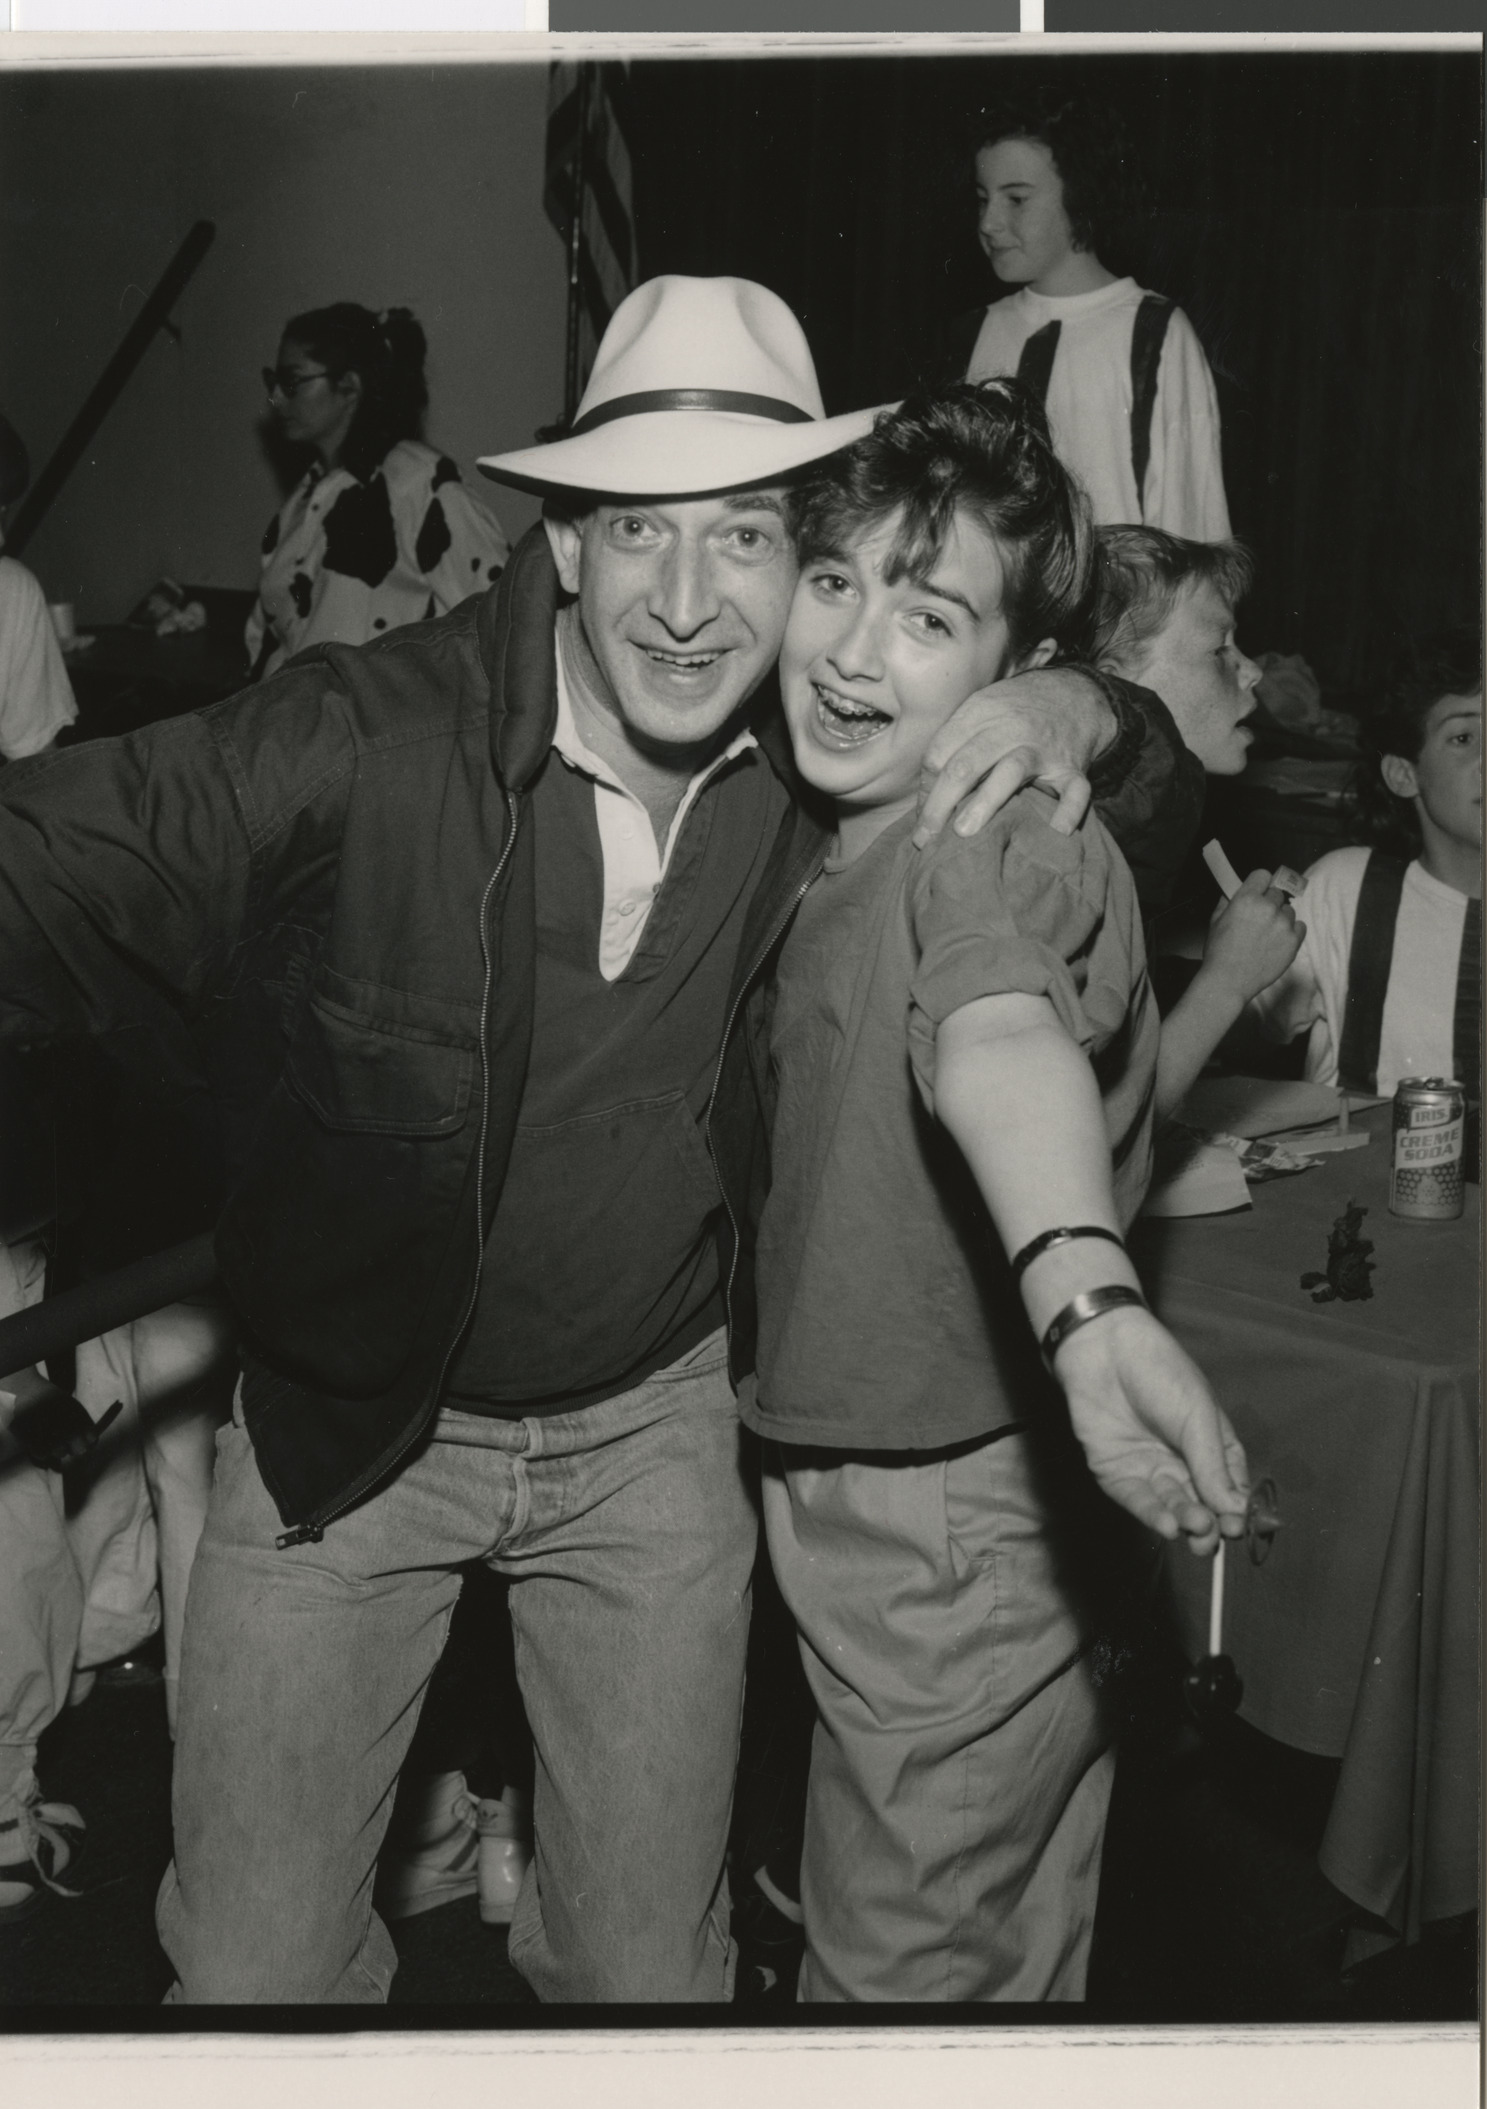 Photograph of Alan Morger and Aviva Morger, 1980s